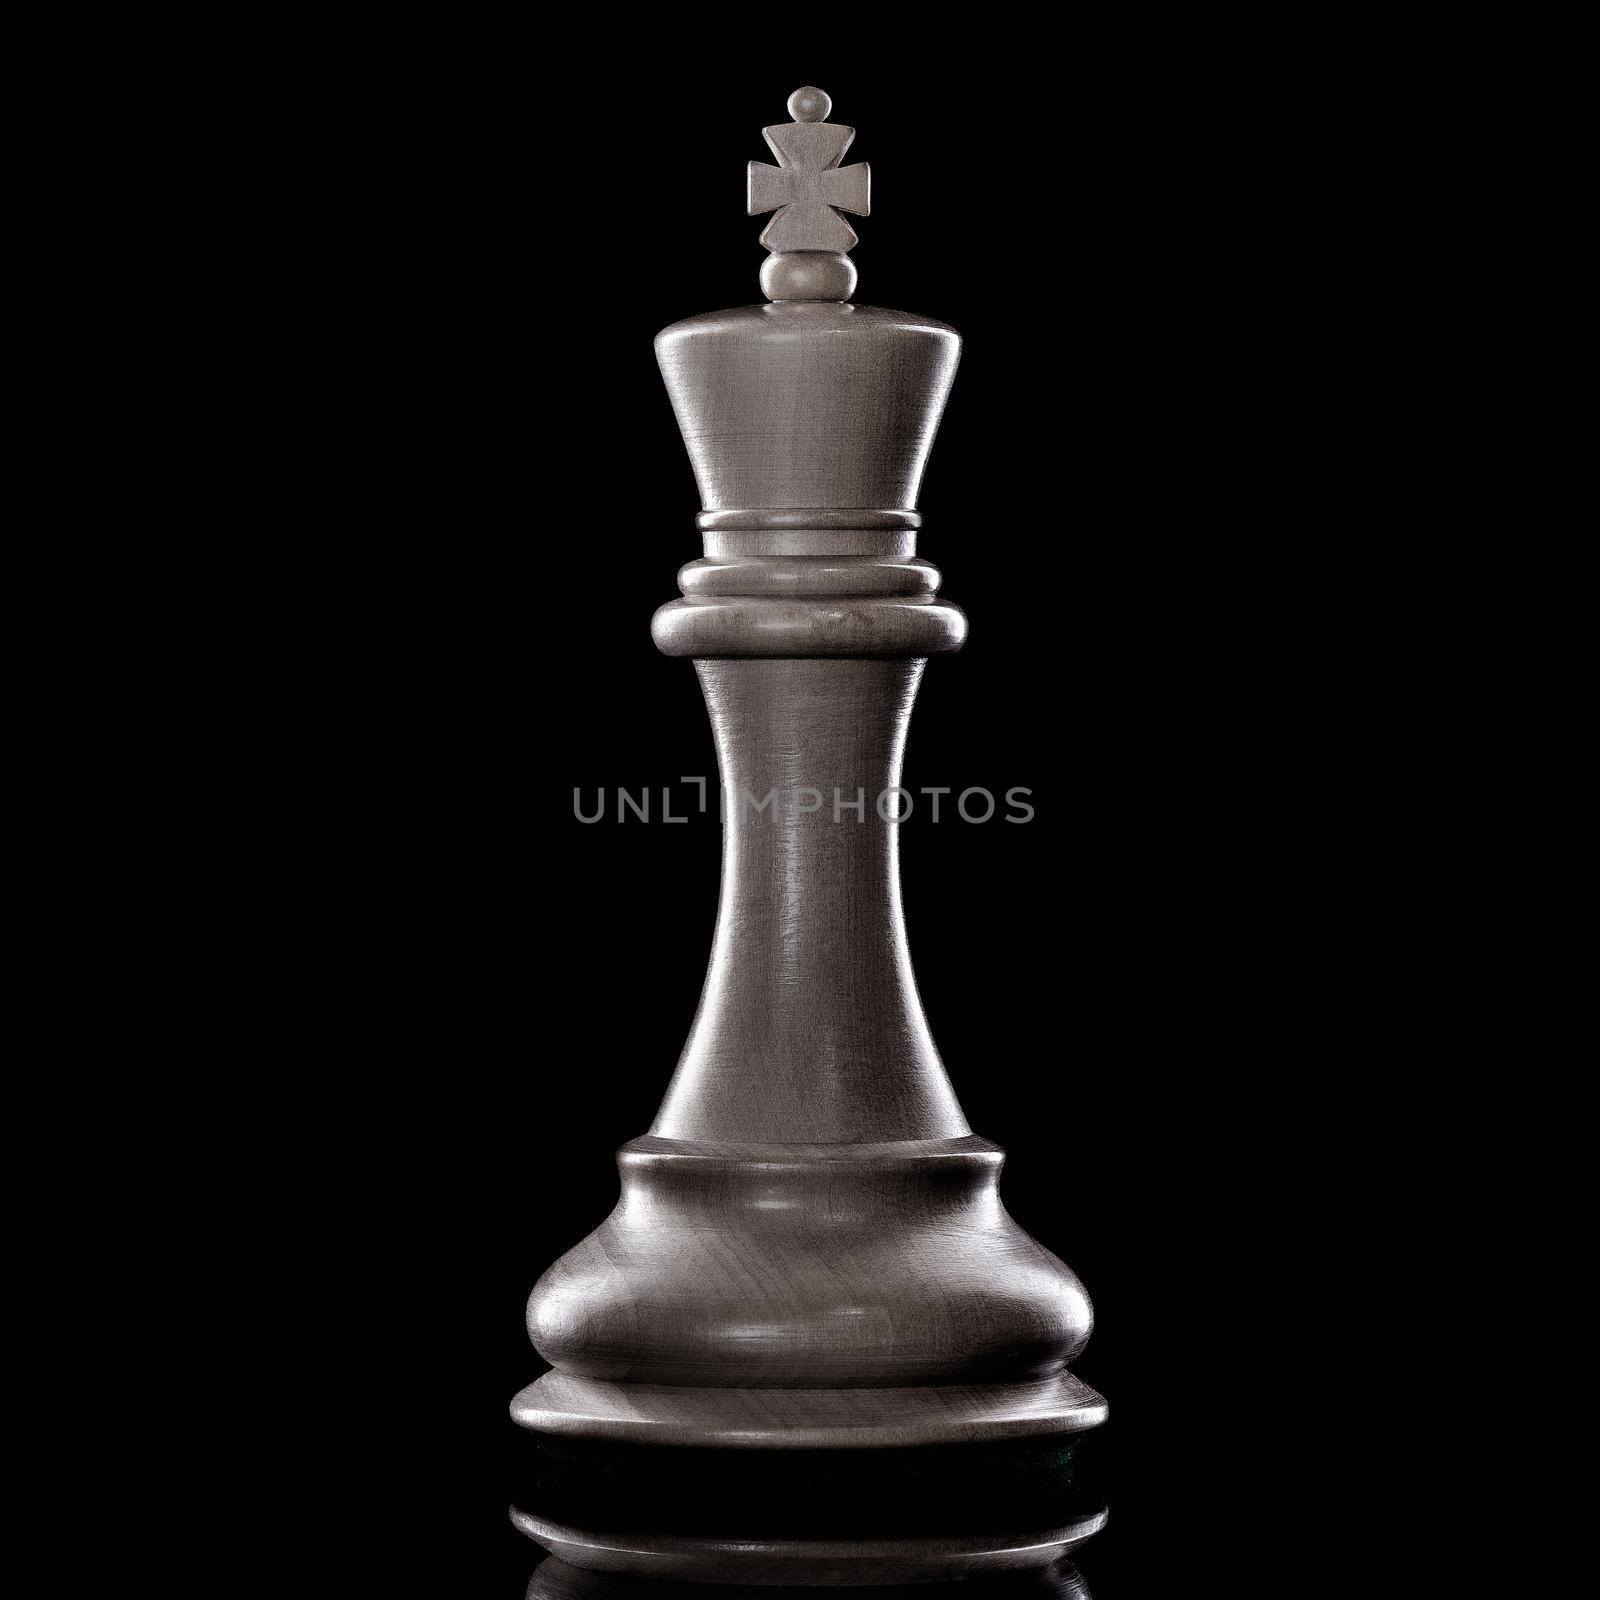 Black and White King of chess setup on dark background. Leader and teamwork concept for success. Chess concept save the King and save the strategy.